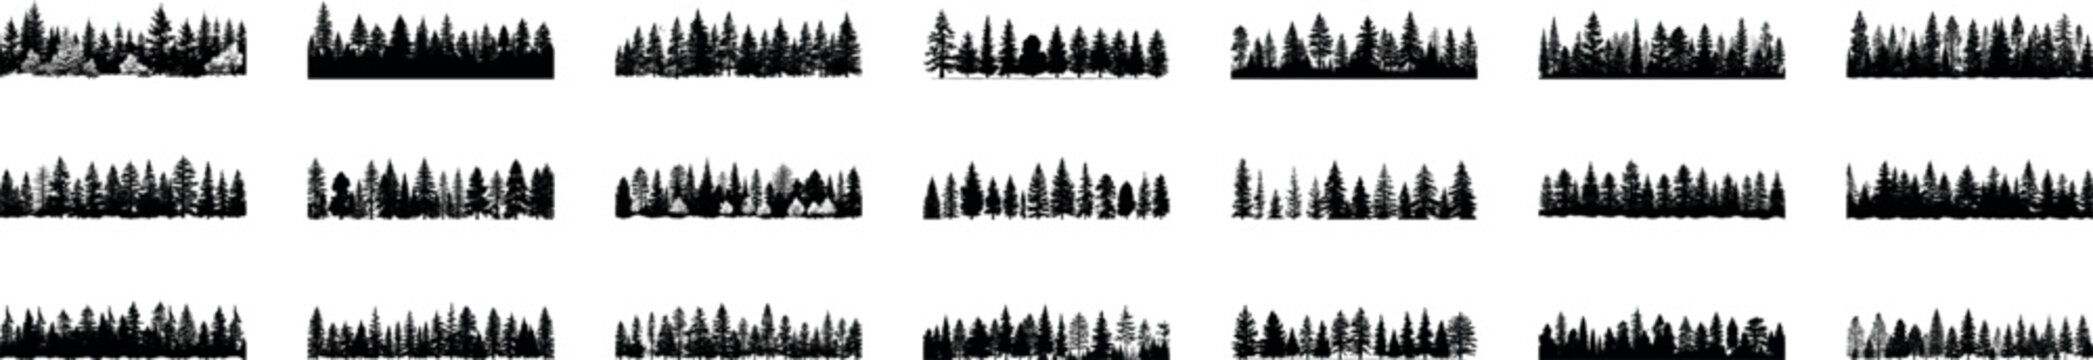 Sets of vector black and white forest icons depict trees, leaves, and wildlife silhouettes for versatile design use.